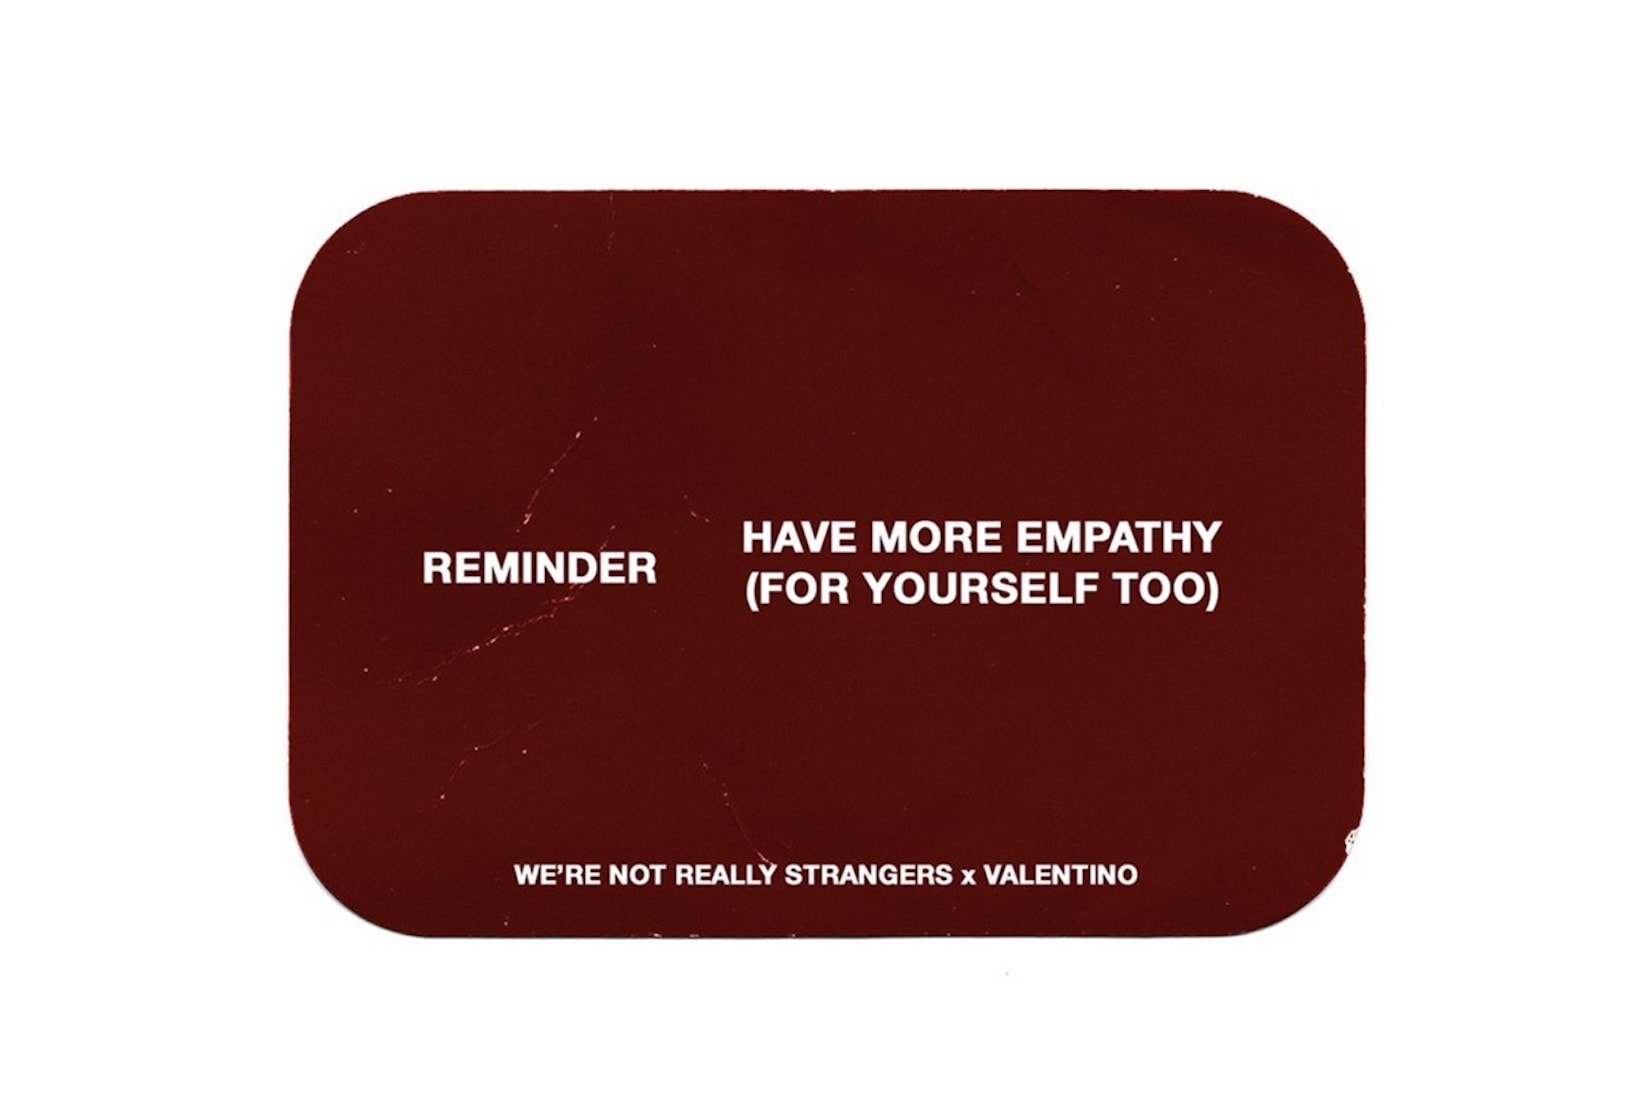 were not really strangers koreen valentino collaboration card game maroon red